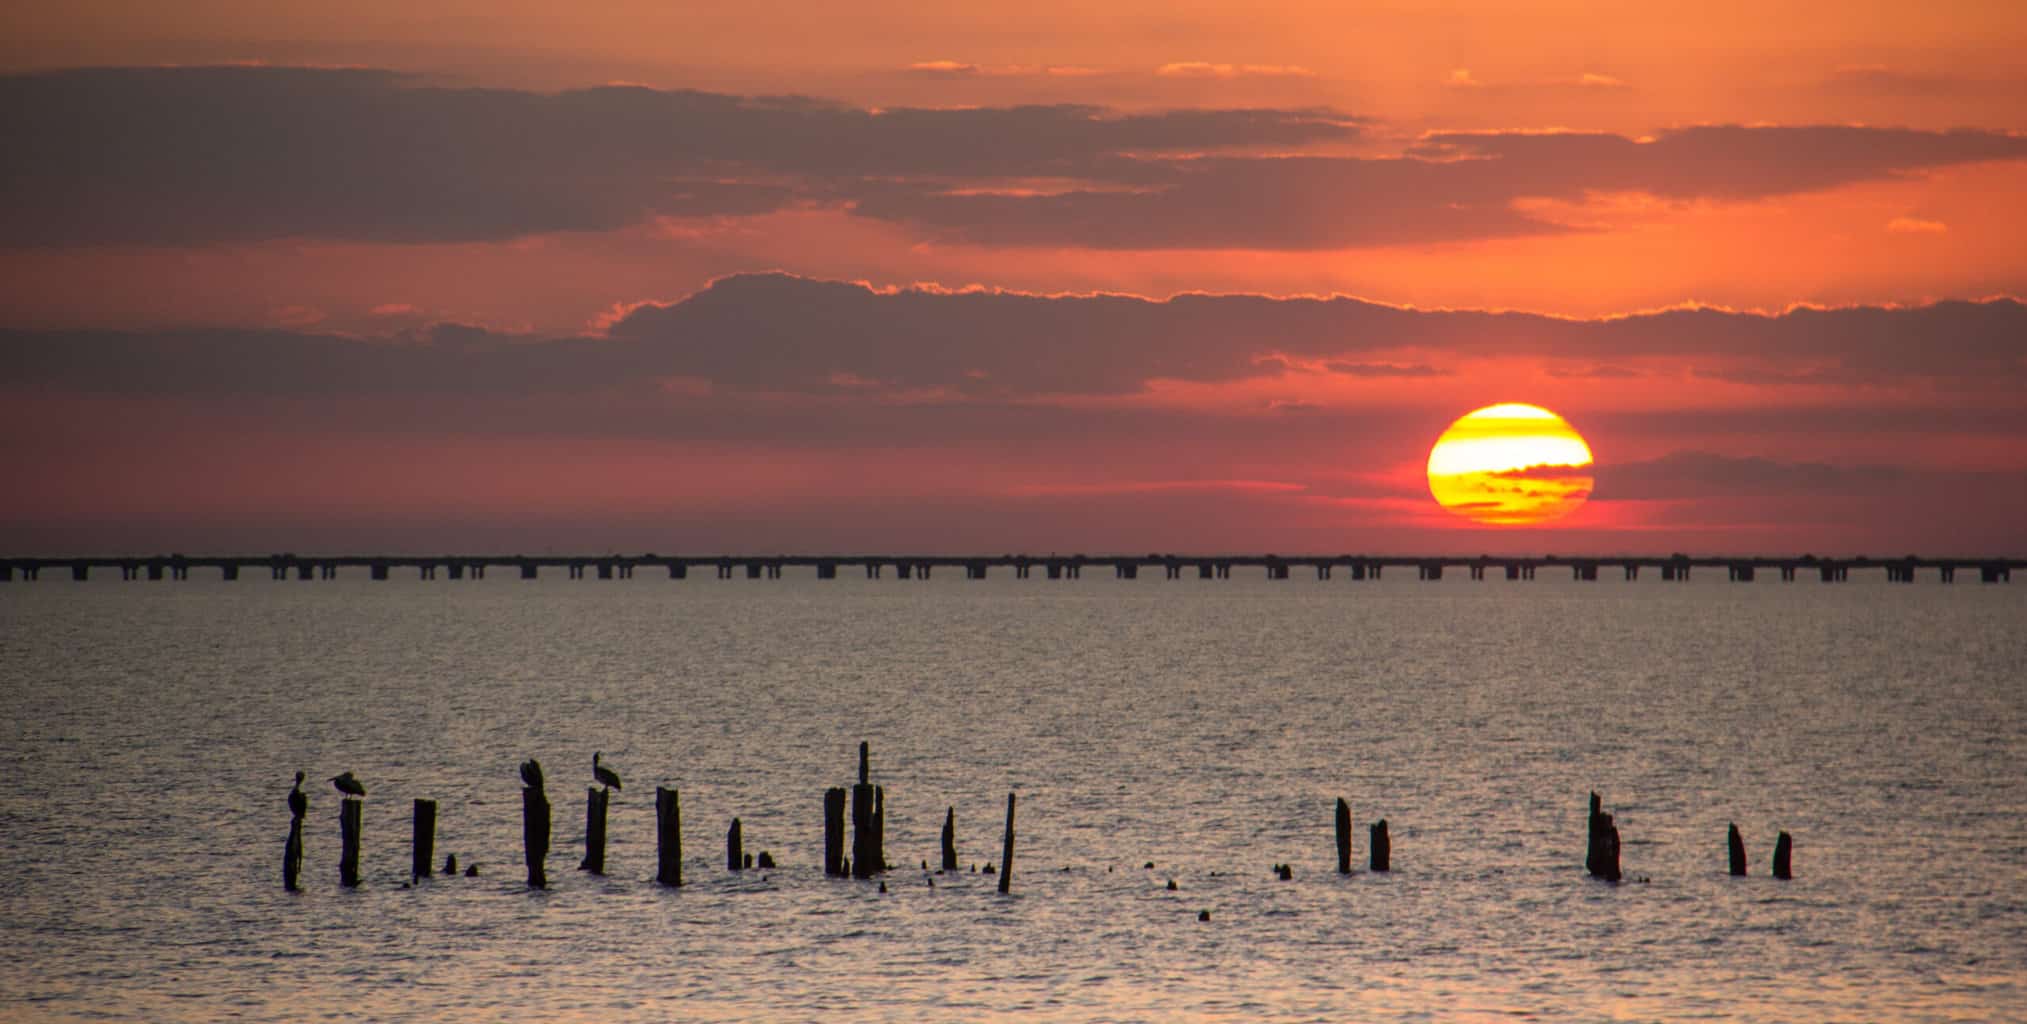 Sunset over Lake Pontchartrain with the causeway in the distance.